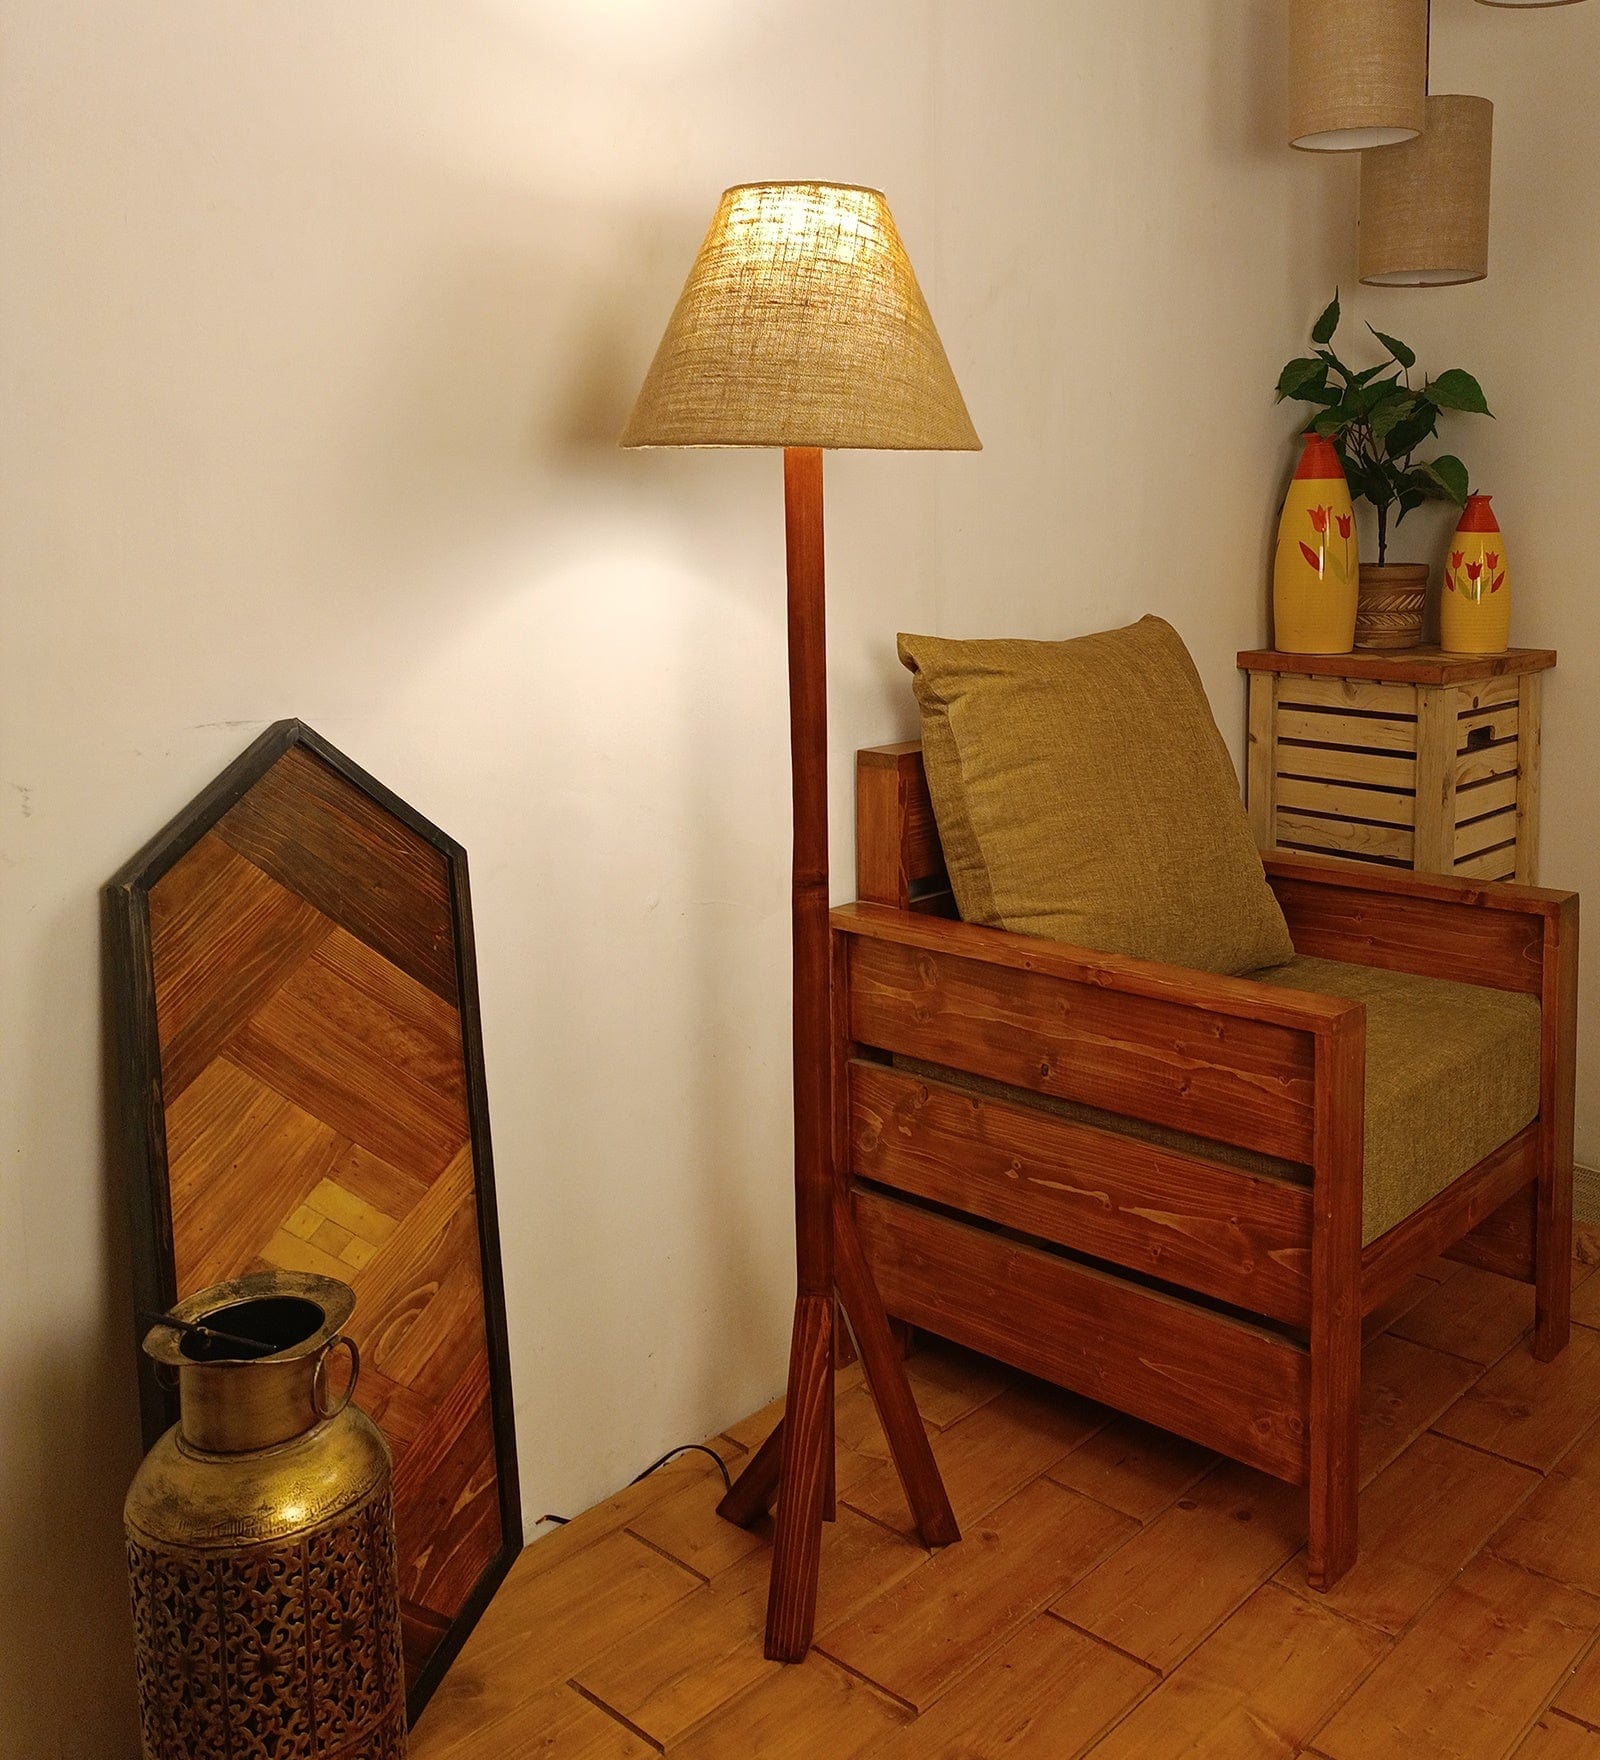 Trinca Wooden Floor Lamp with Brown Base and Jute Fabric Lampshade (BULB NOT INCLUDED)